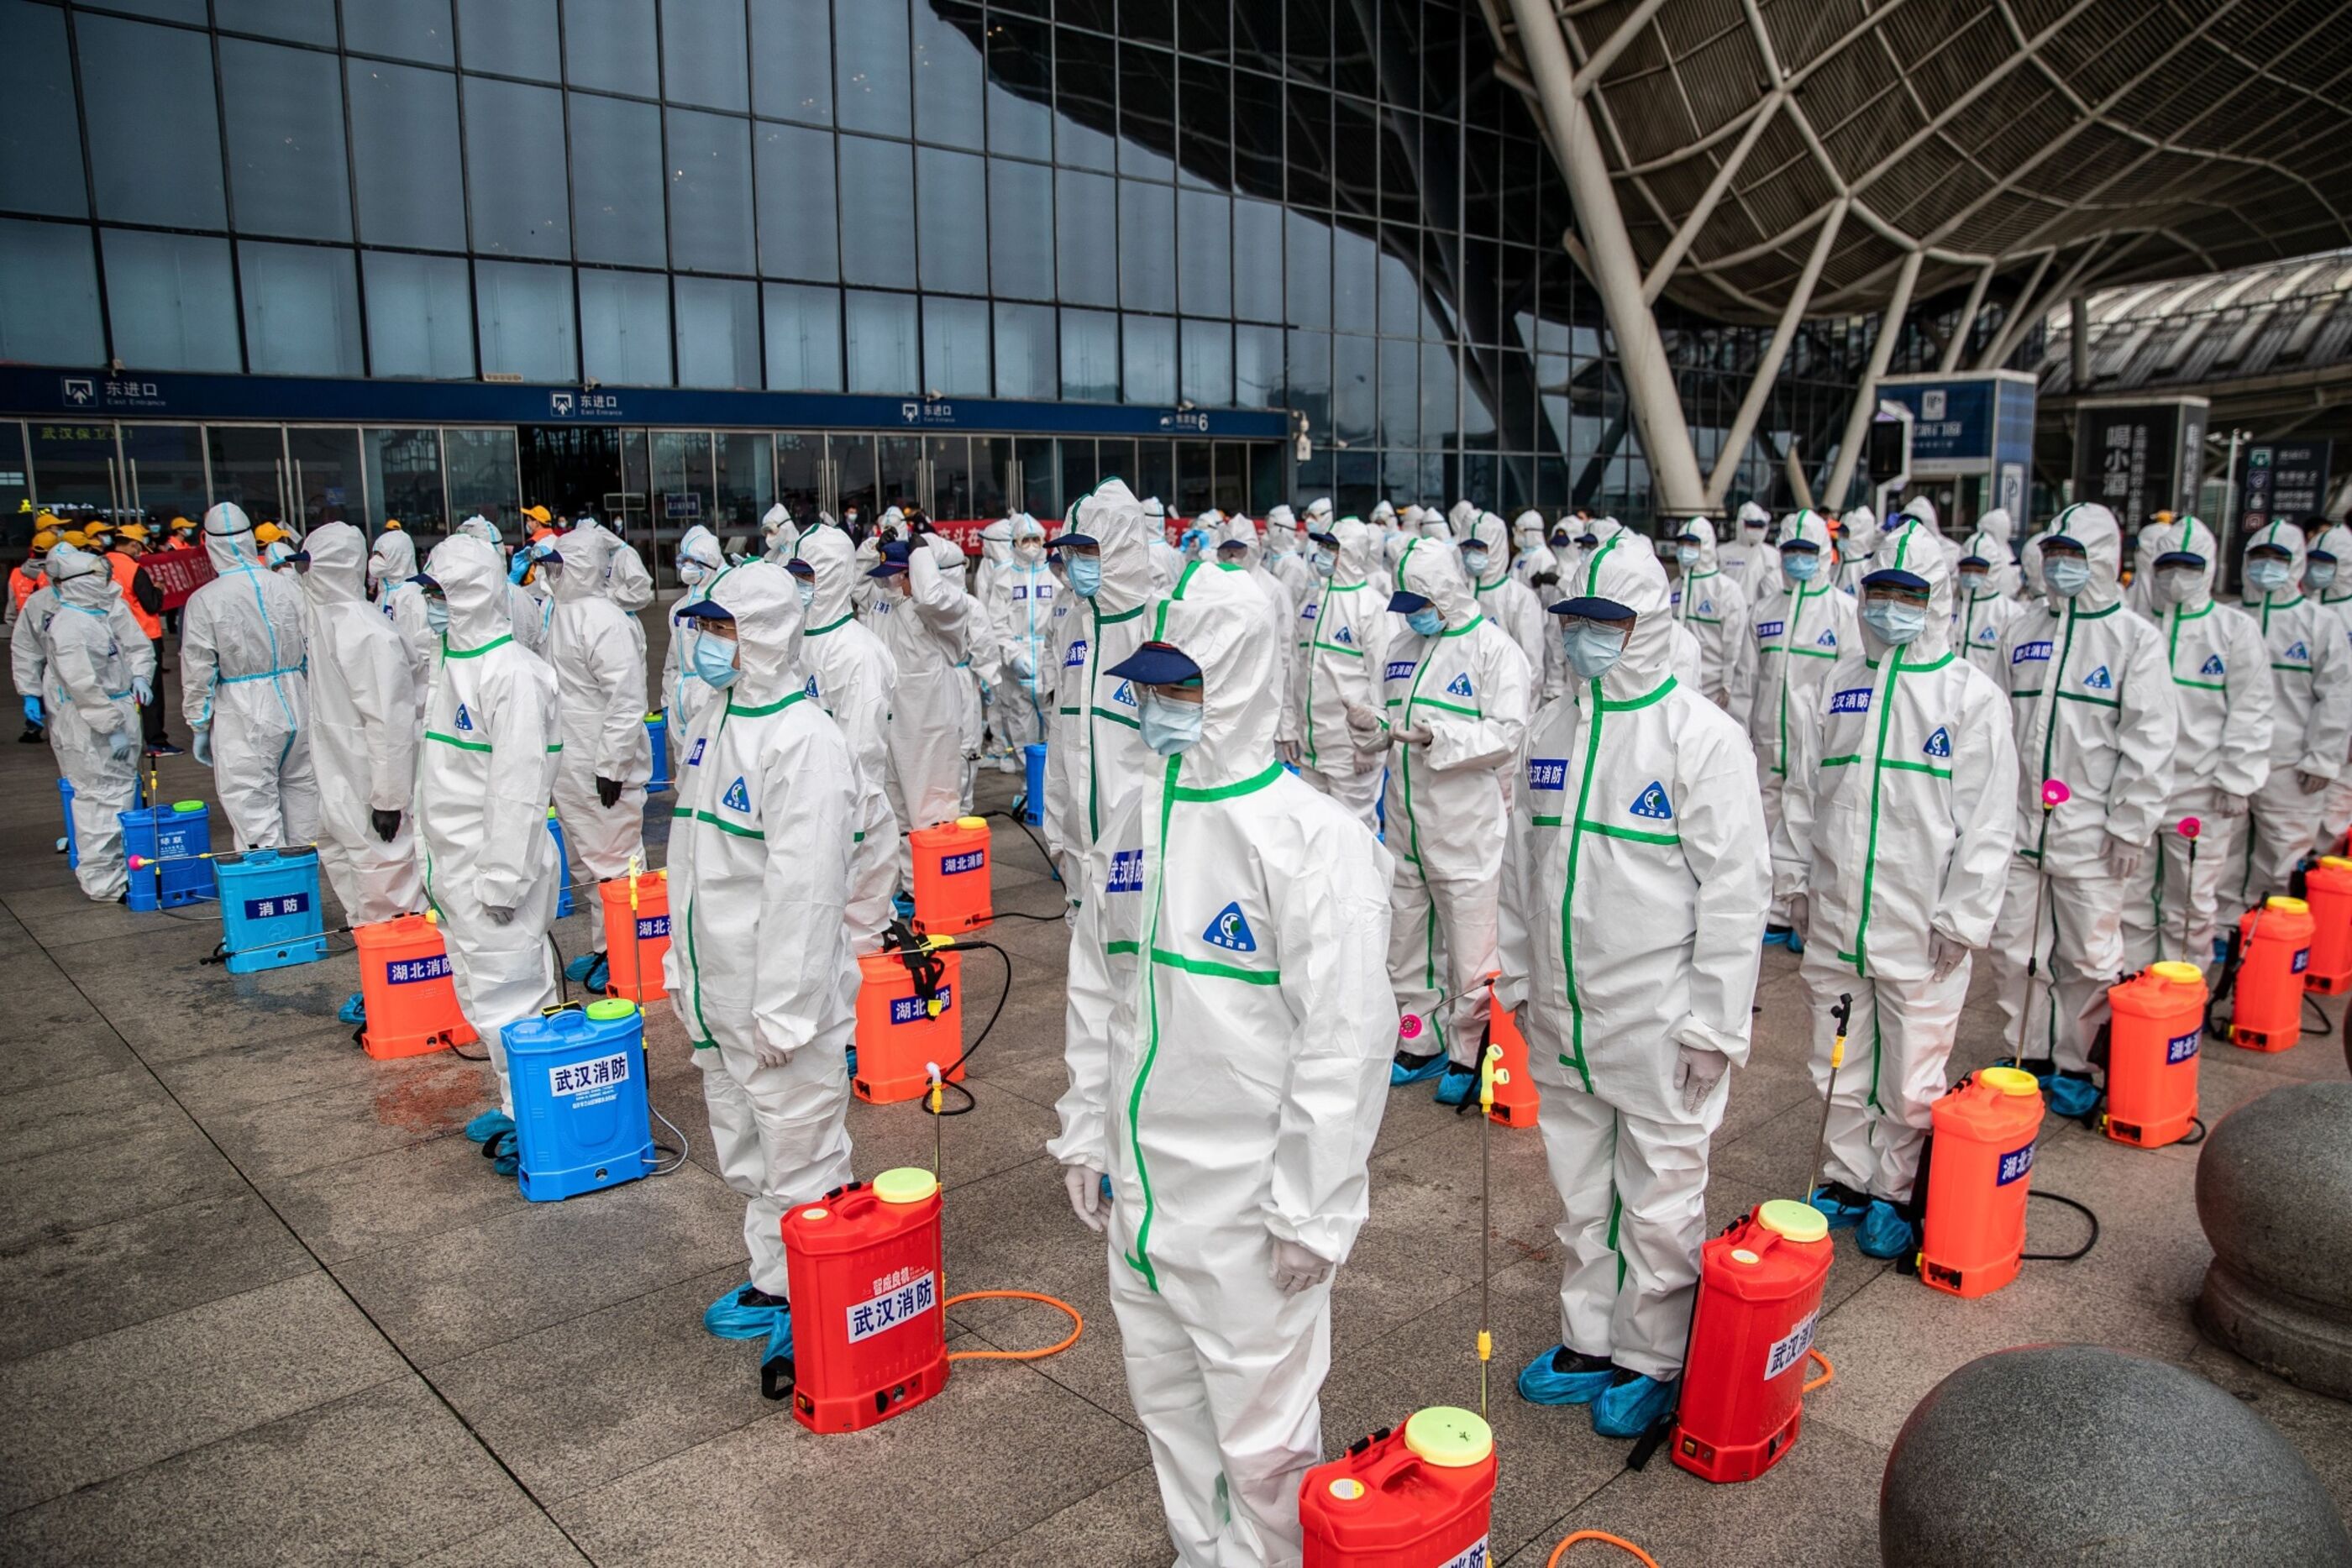 A group of people in white protective jumpsuits, face masks and goggles stand in rows, each with a tub of disinfectant and sprayer.